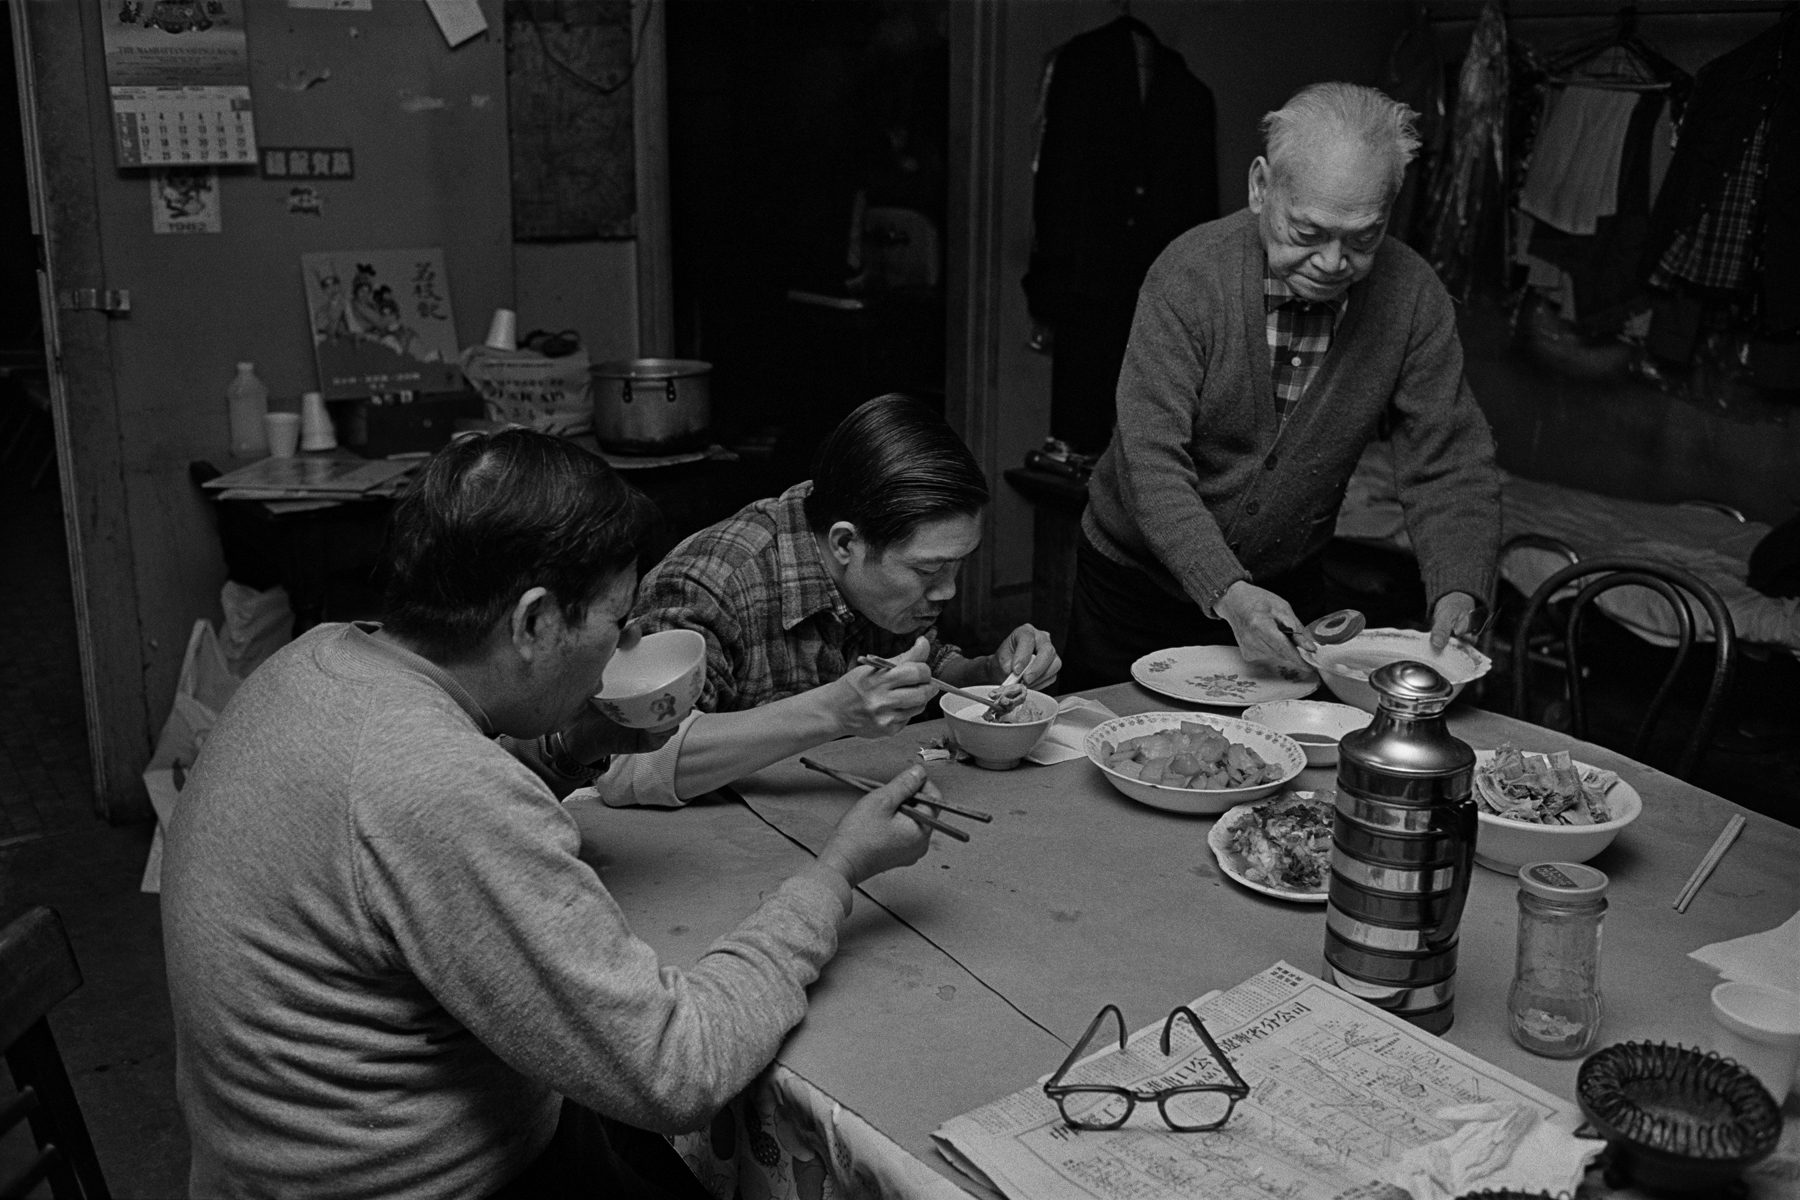 3 men at the common table eating dinner in Bachelor Apartment, they share on Bayard St., New York Chinatown, 1982